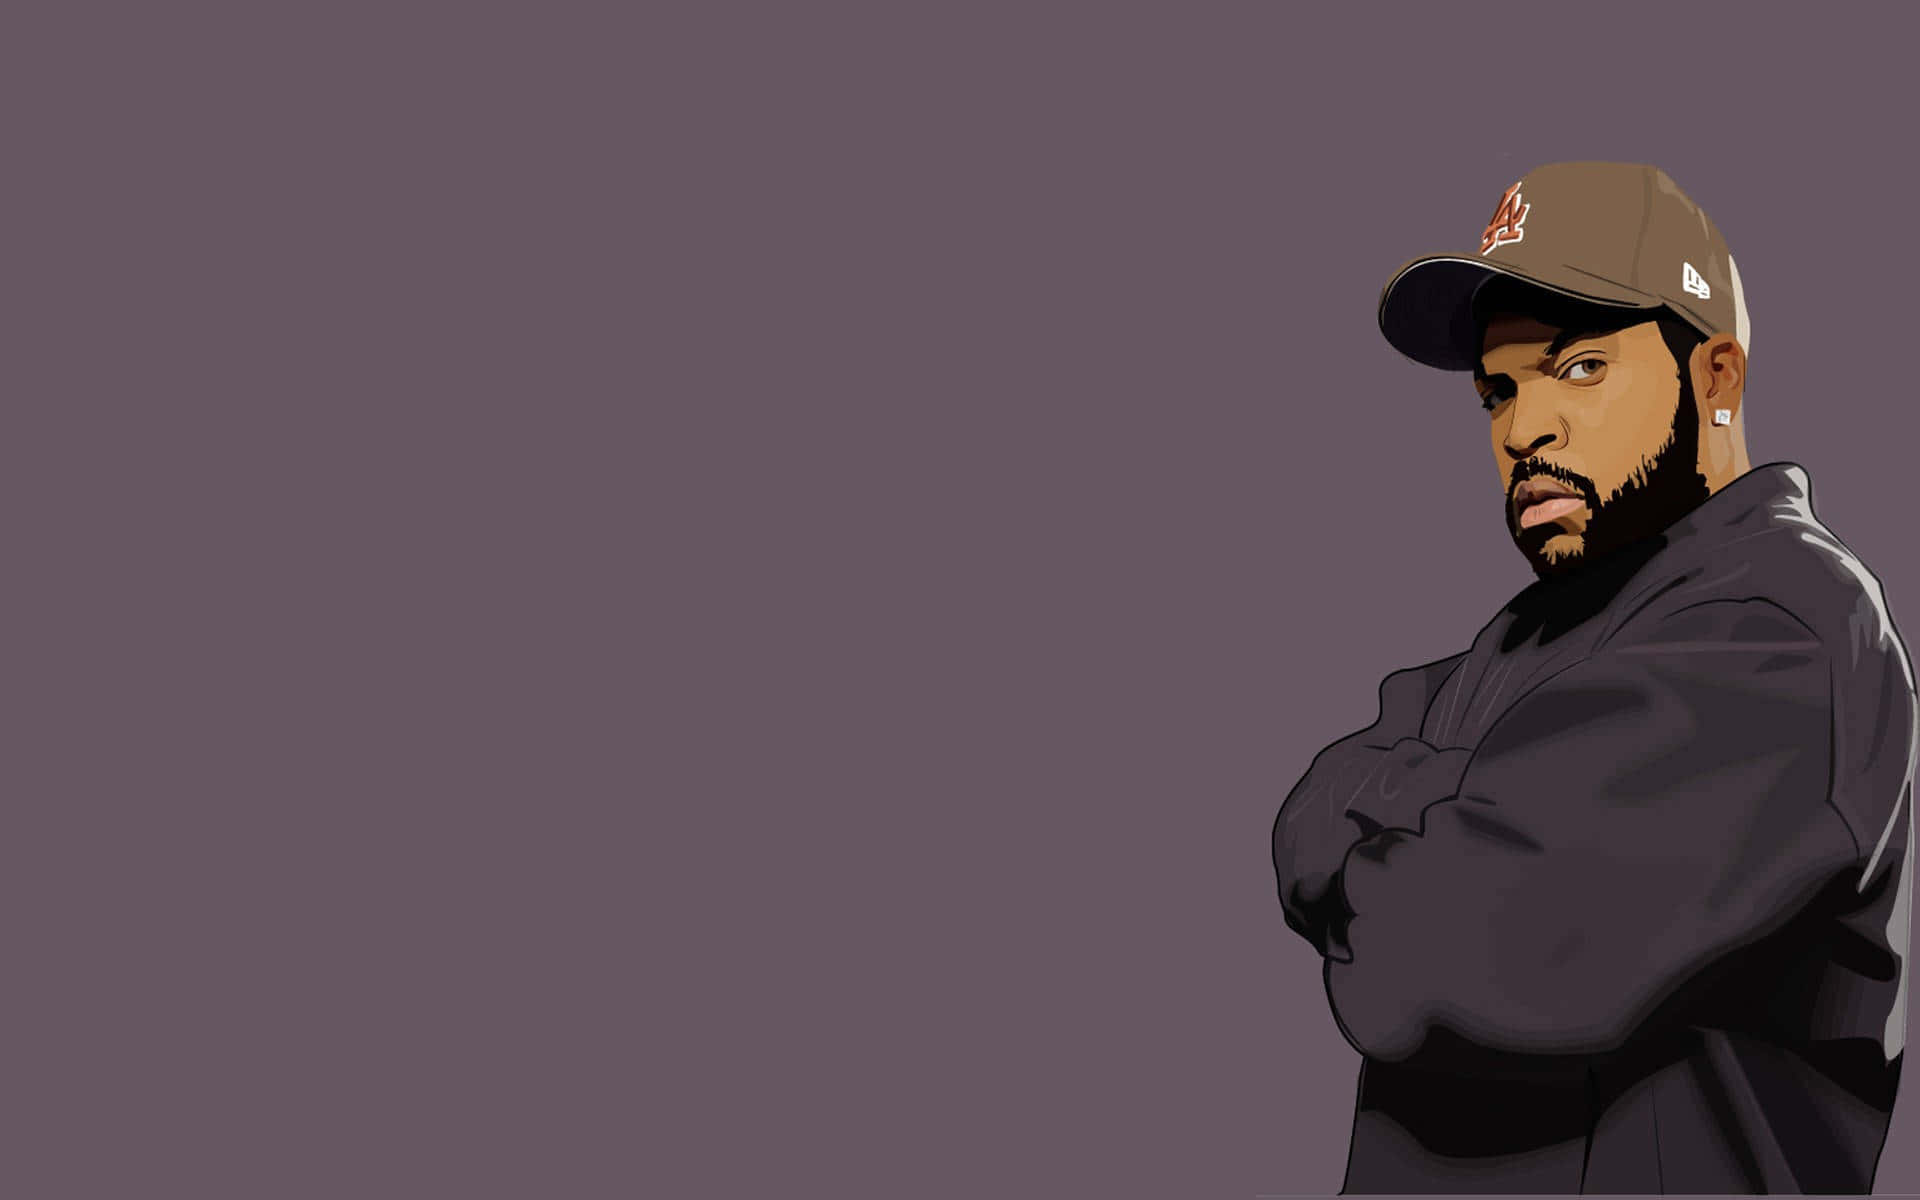 "Cool rap is the newest way to express yourself and stand out from the crowd" Wallpaper